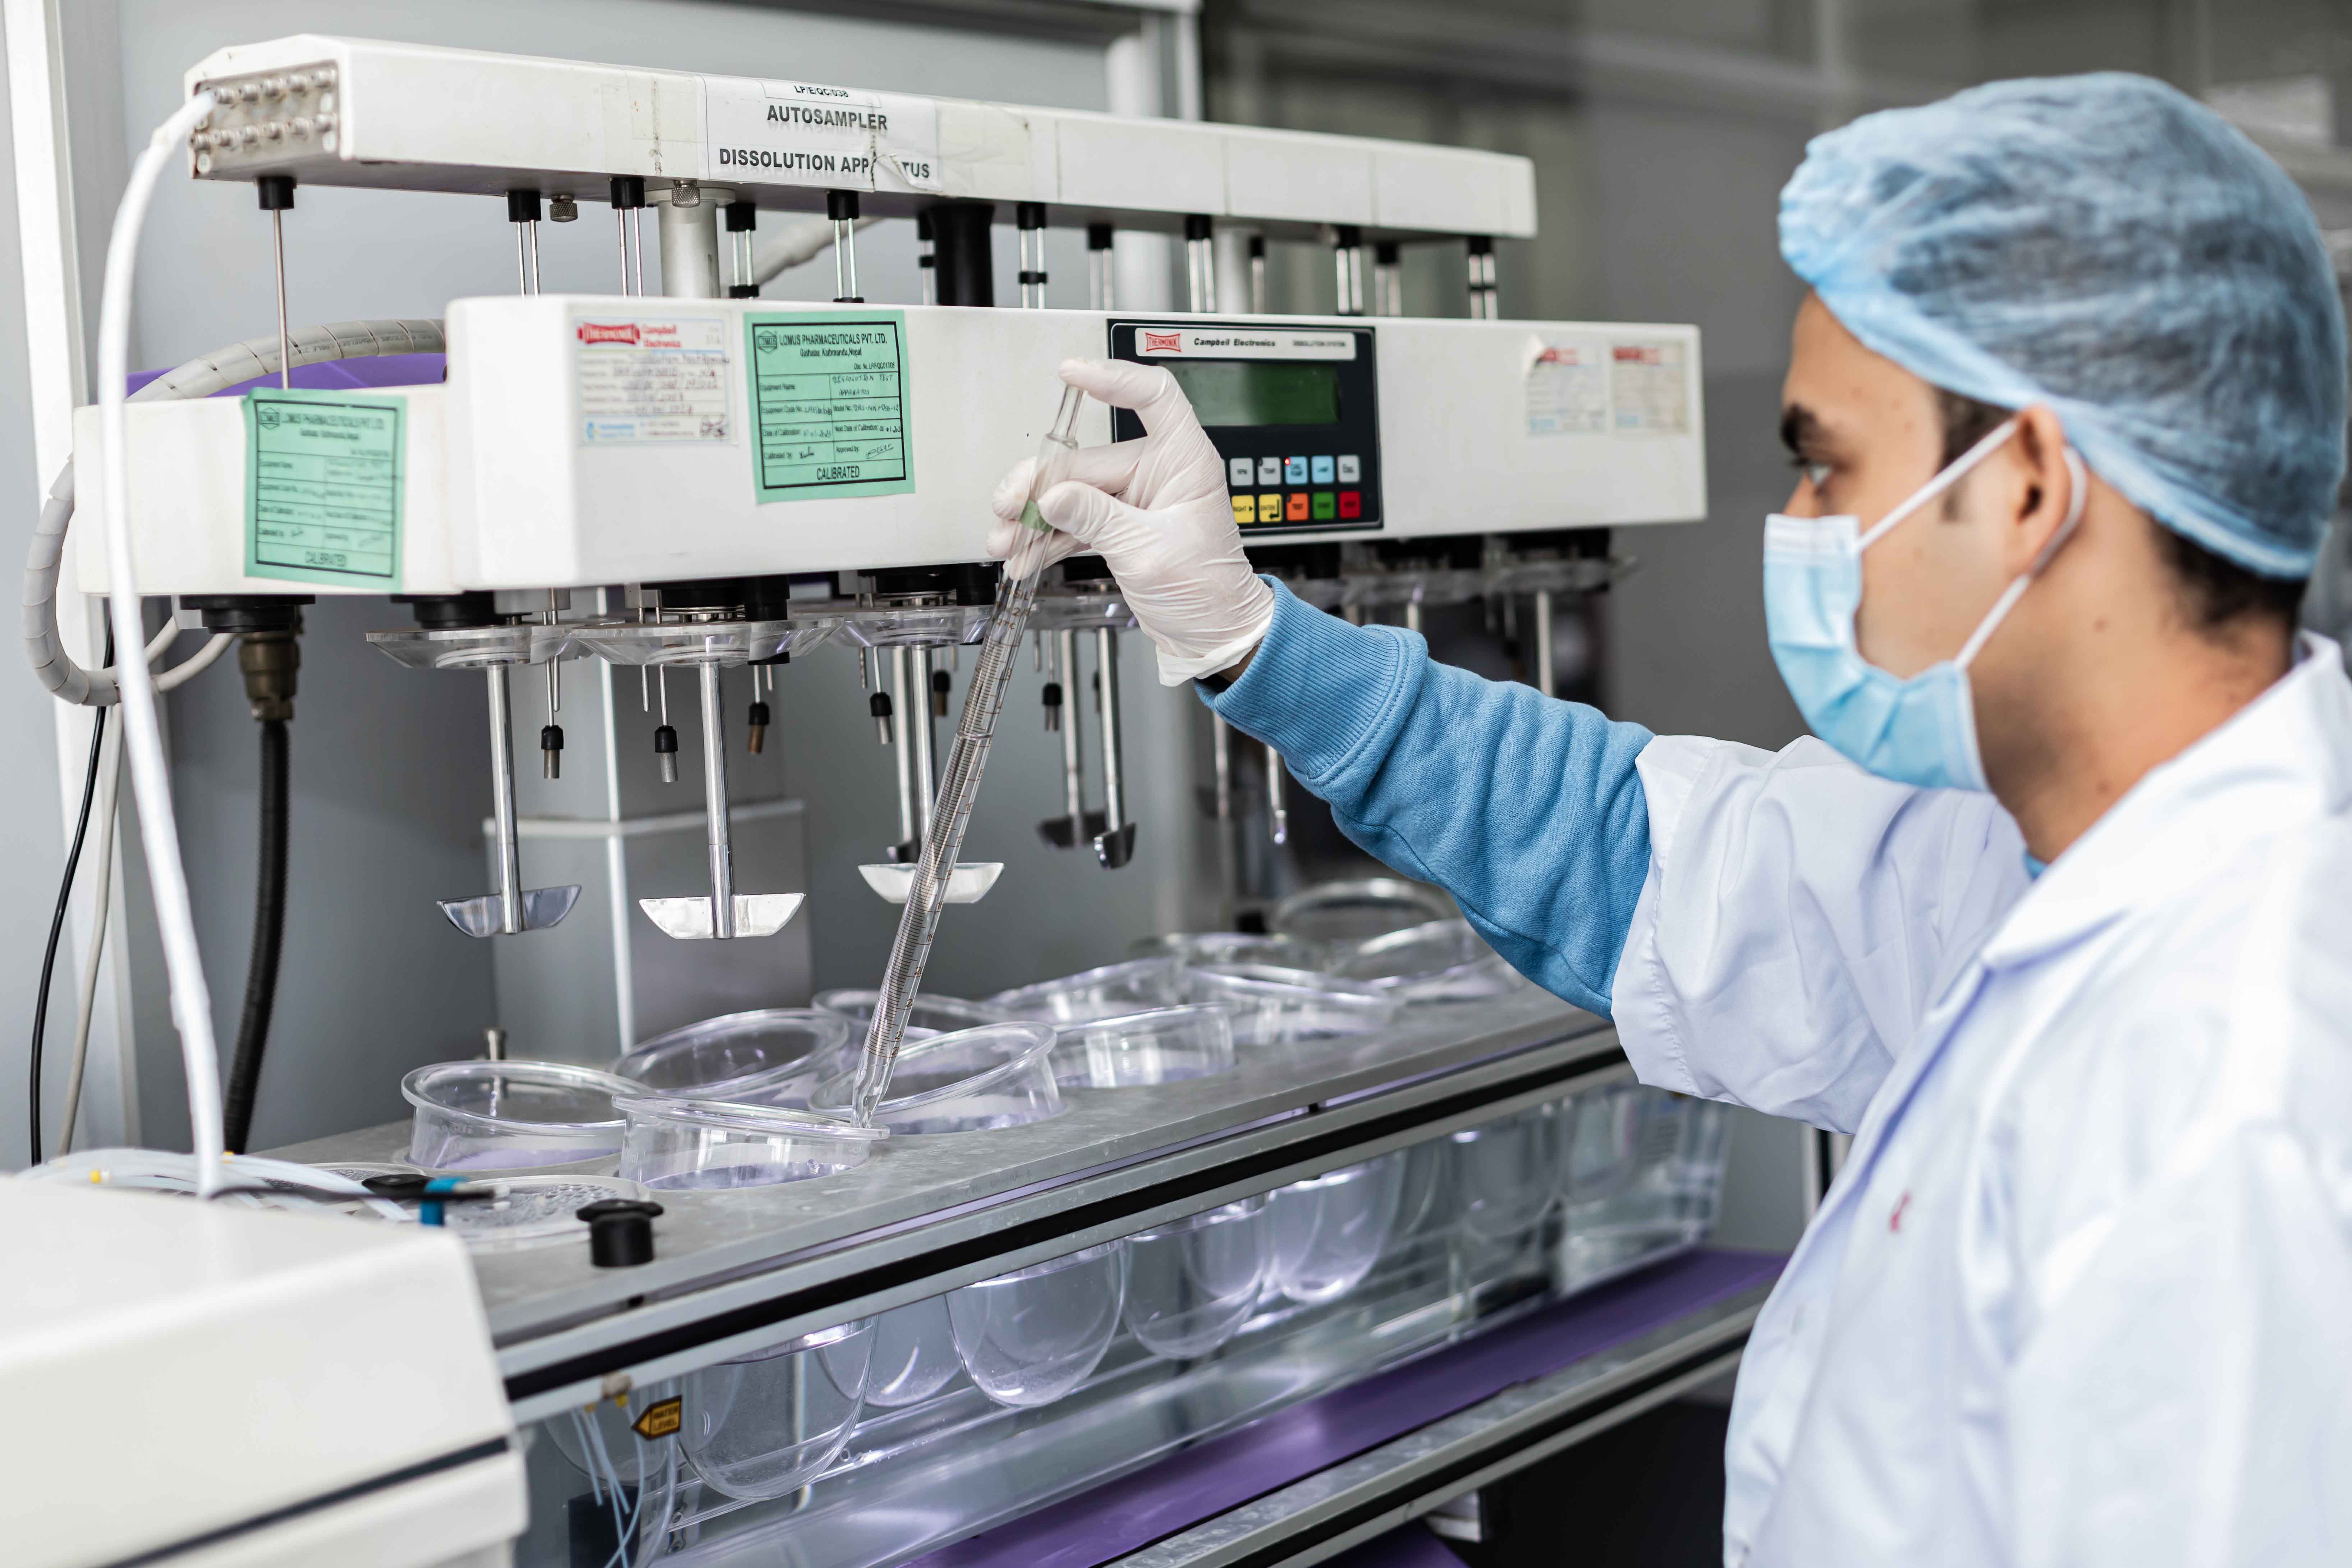 "The Art of Developing Medicines: Inside Our Production Process"